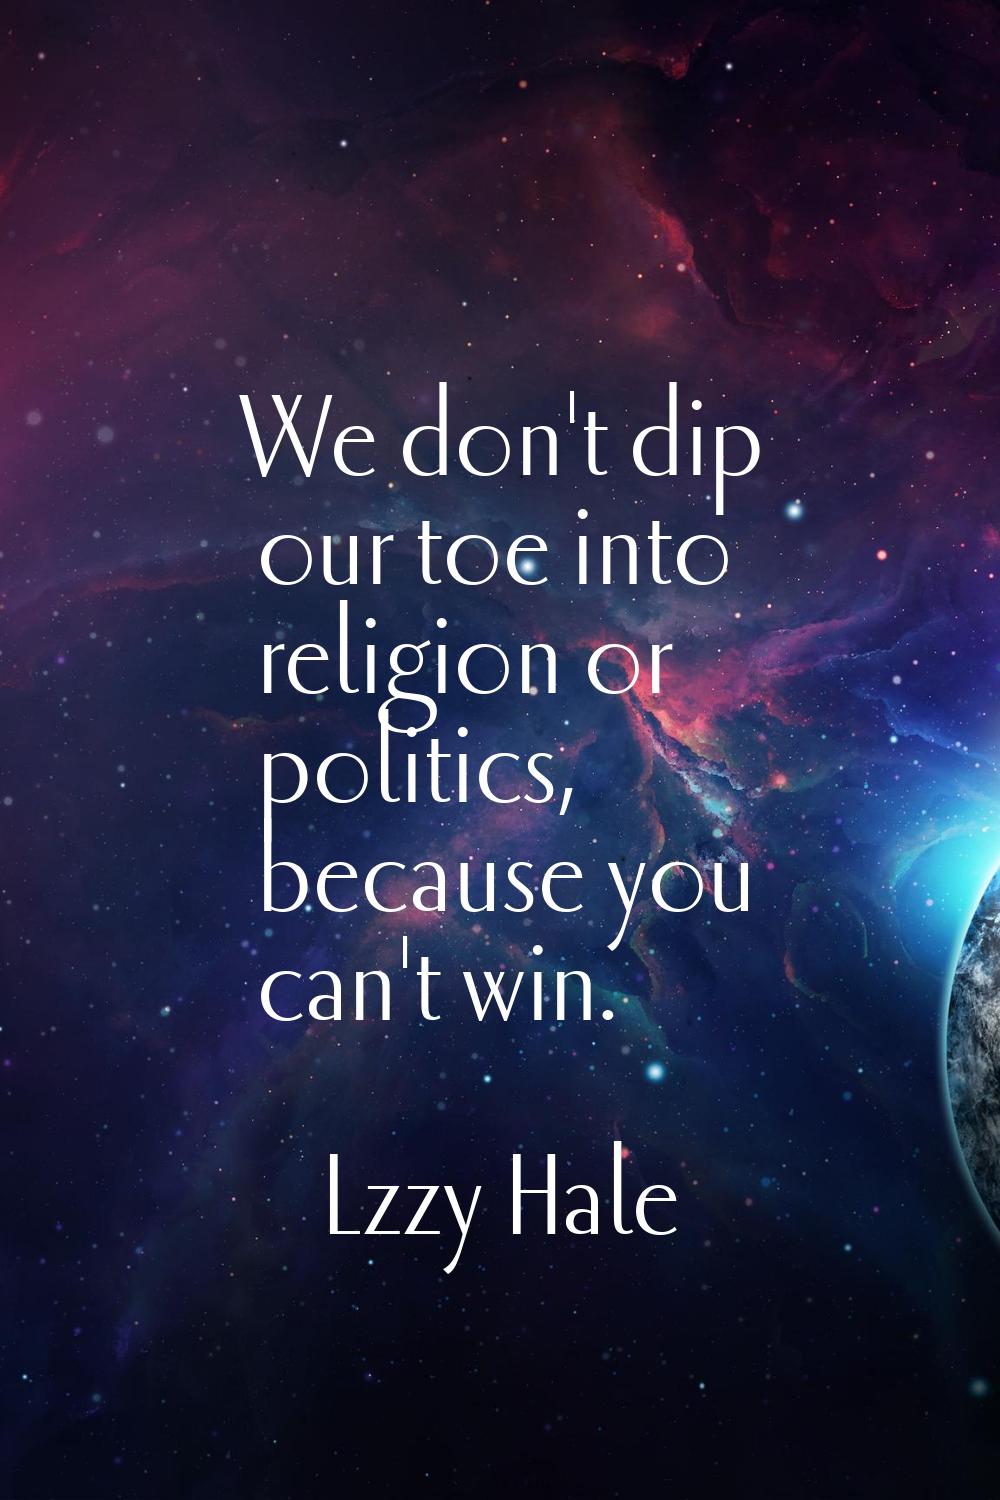 We don't dip our toe into religion or politics, because you can't win.